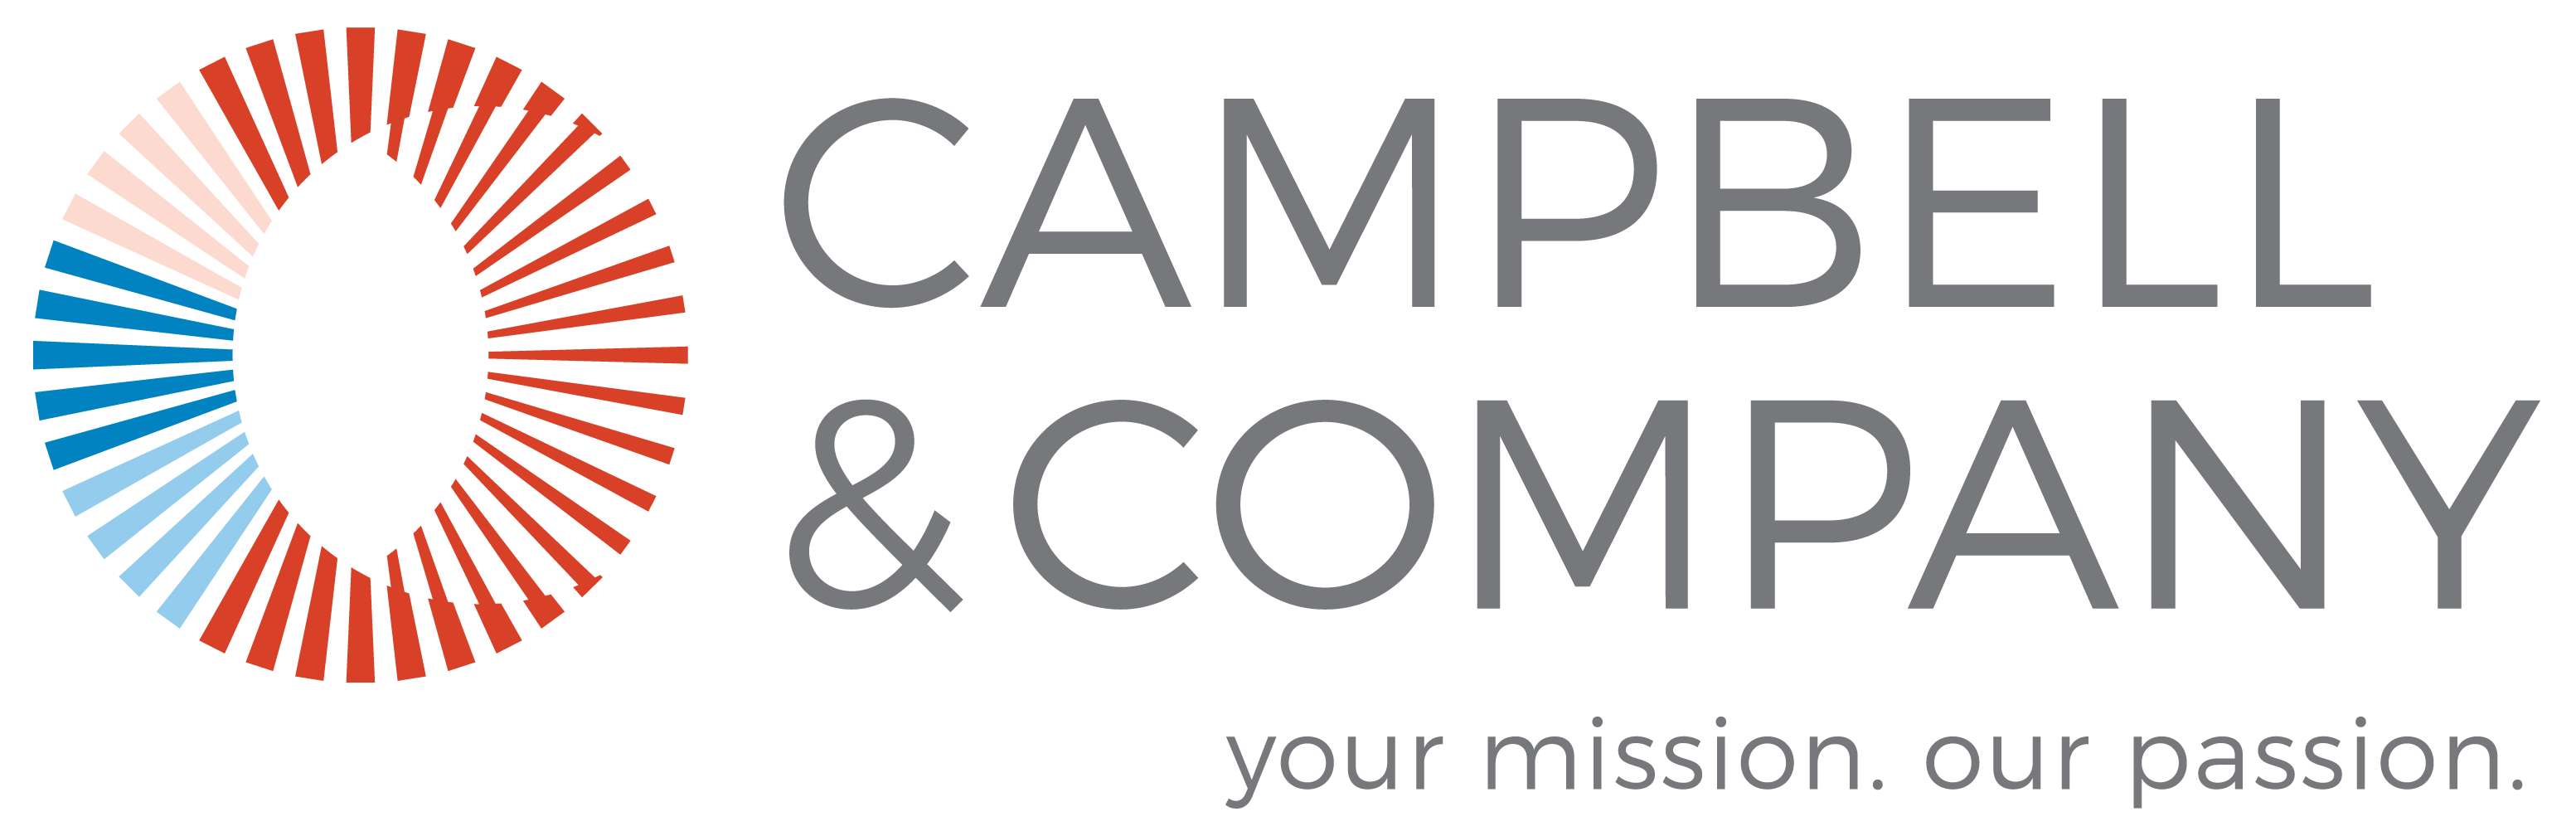 Campbell & Company, a national consulting firm